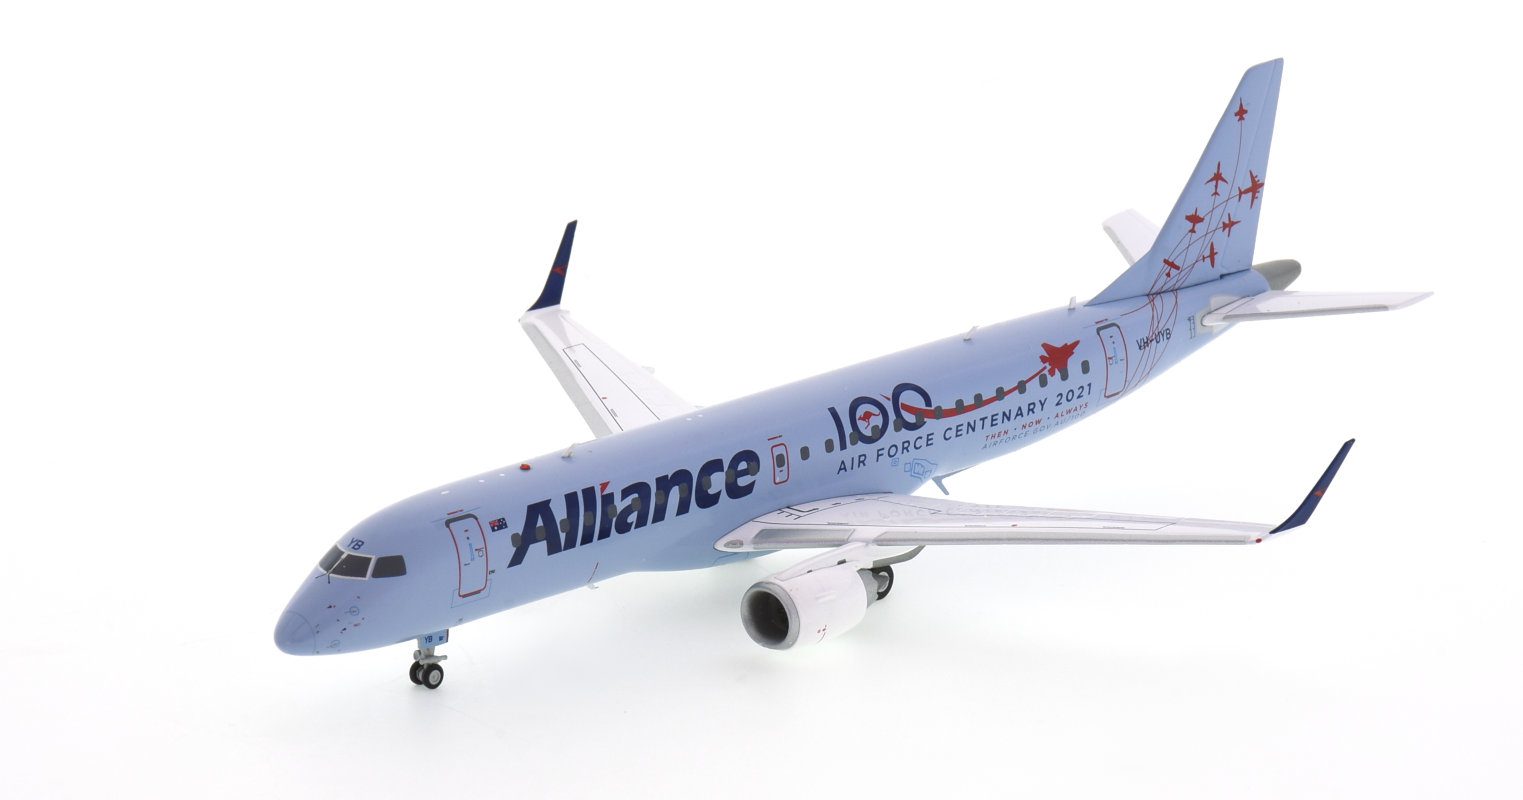 Front port side view of Gemini Jets G2UTY995 - 1/200 scale diecast model Embraer E190AR (EJR190-100AR) registration VH-UYB in Alliance Airlines's 